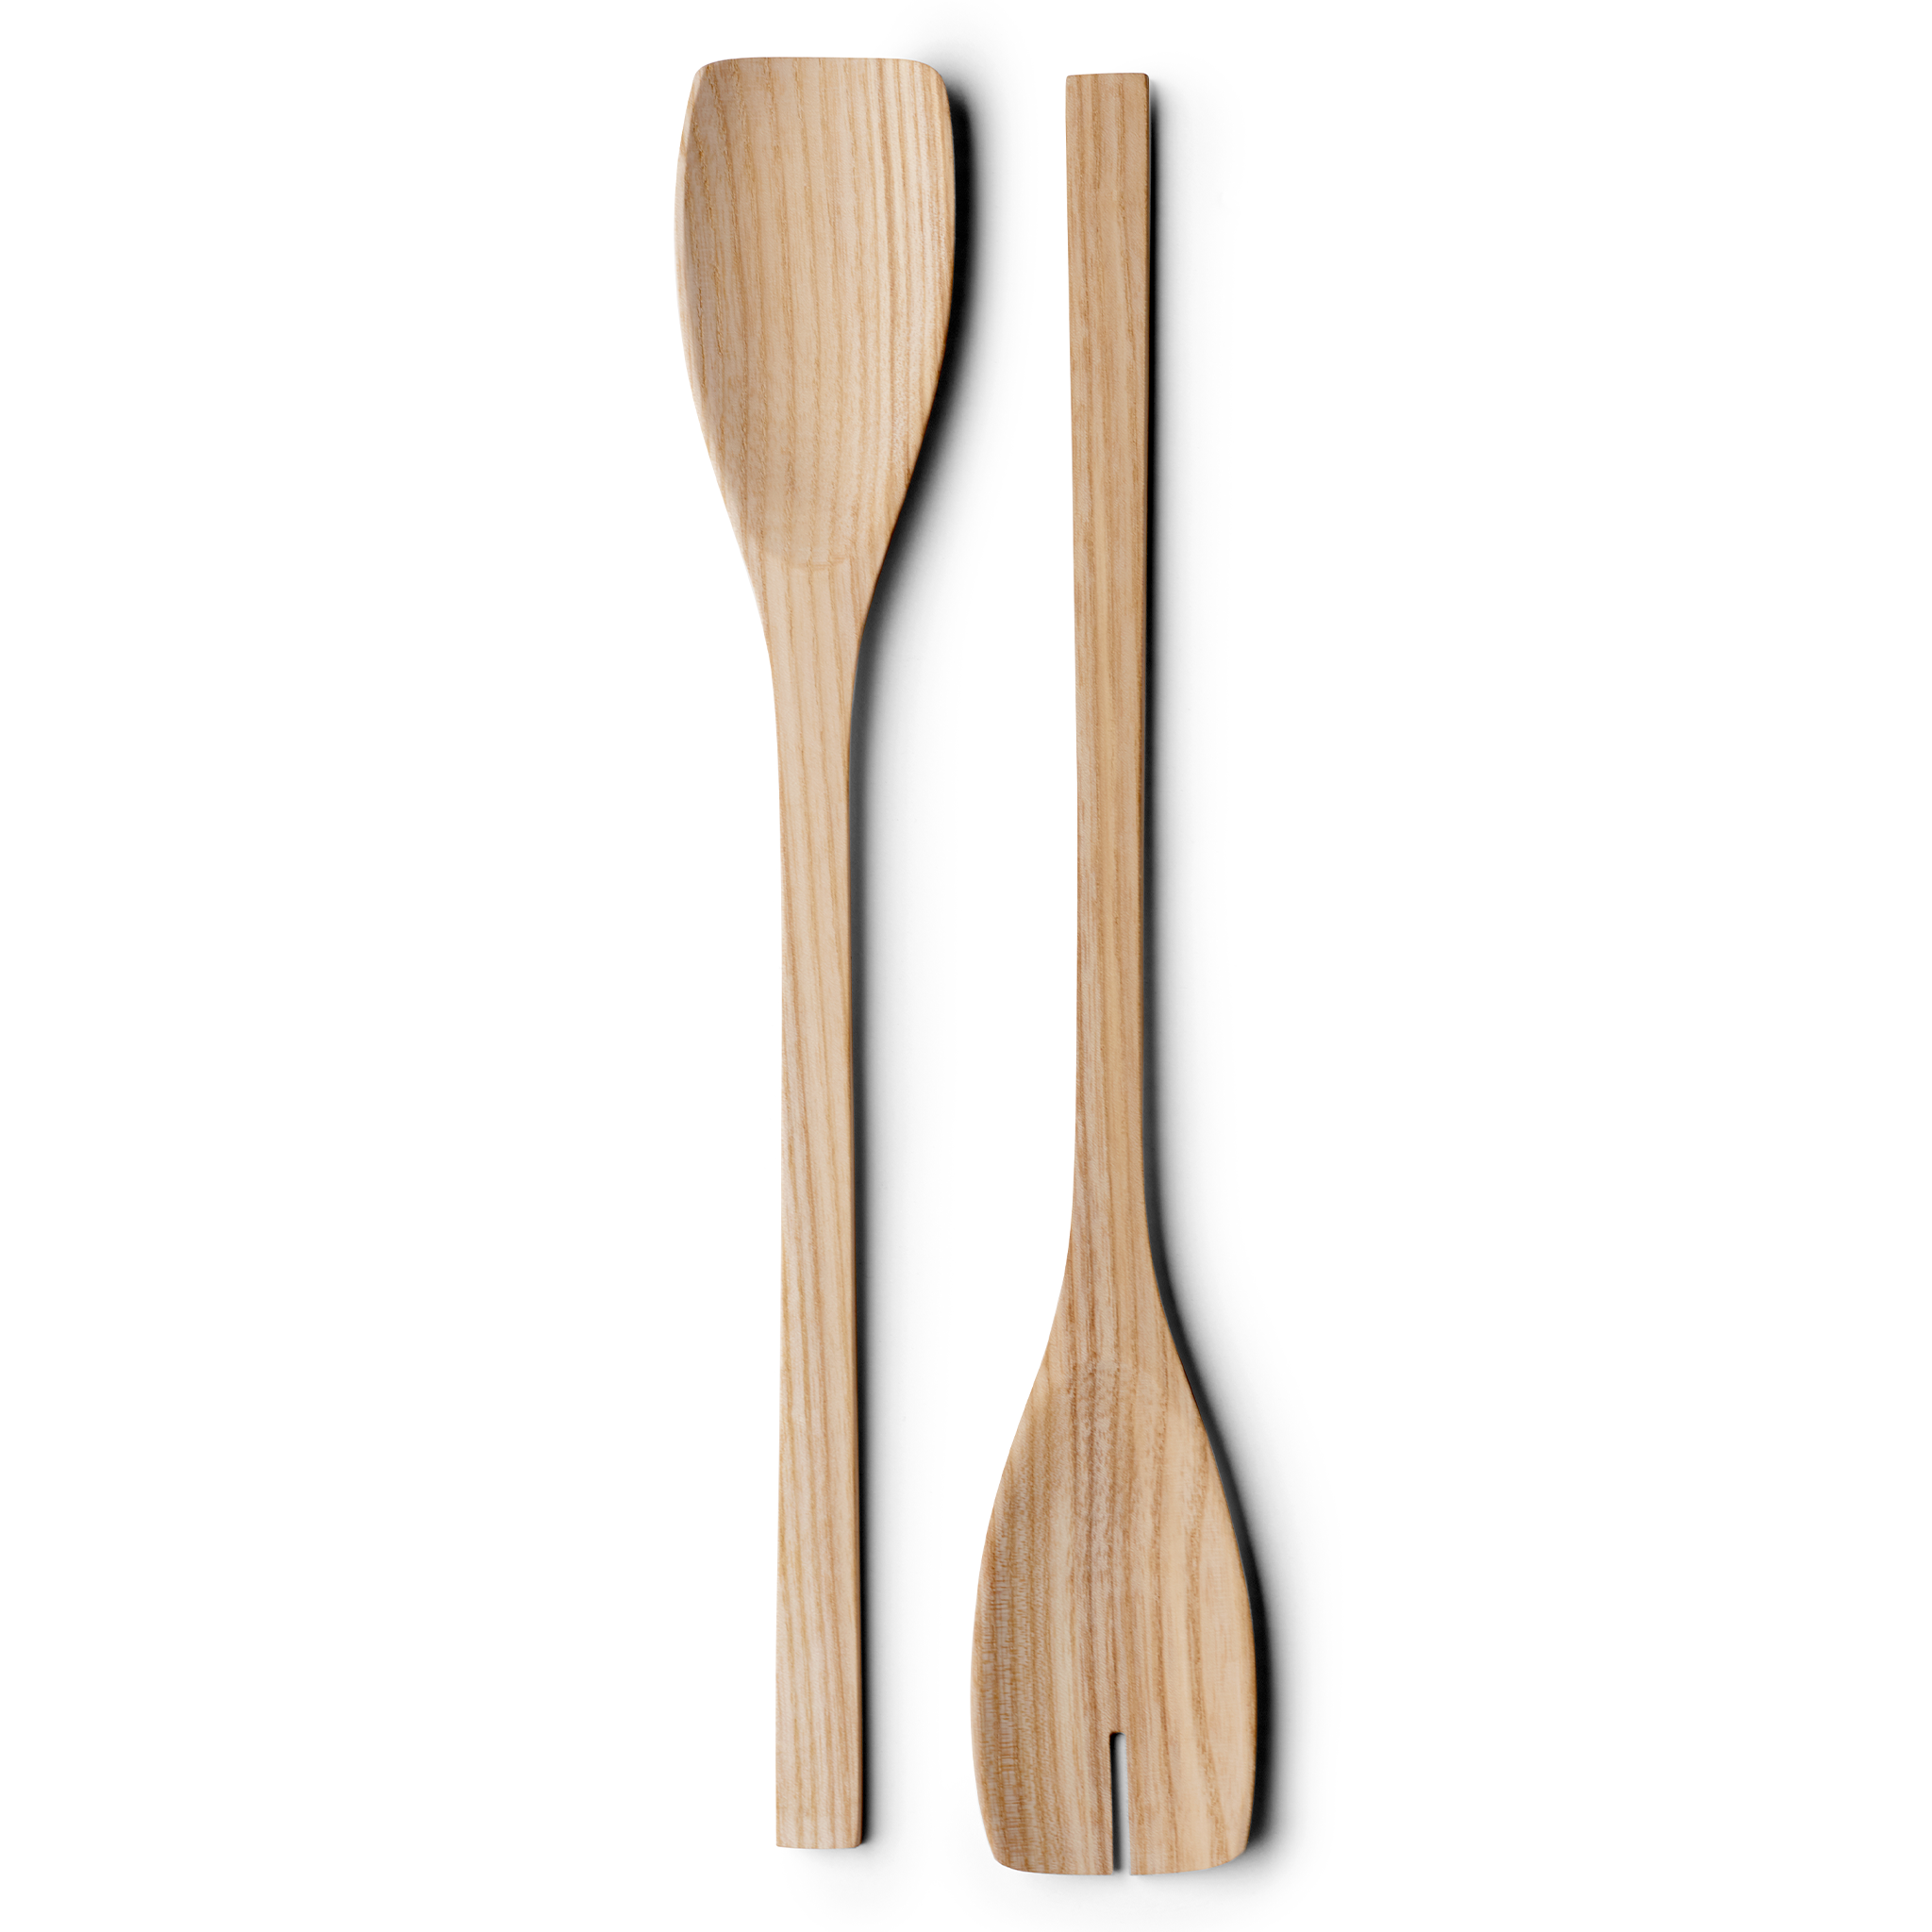 Salad Servers by John Pawson for When Objects Work